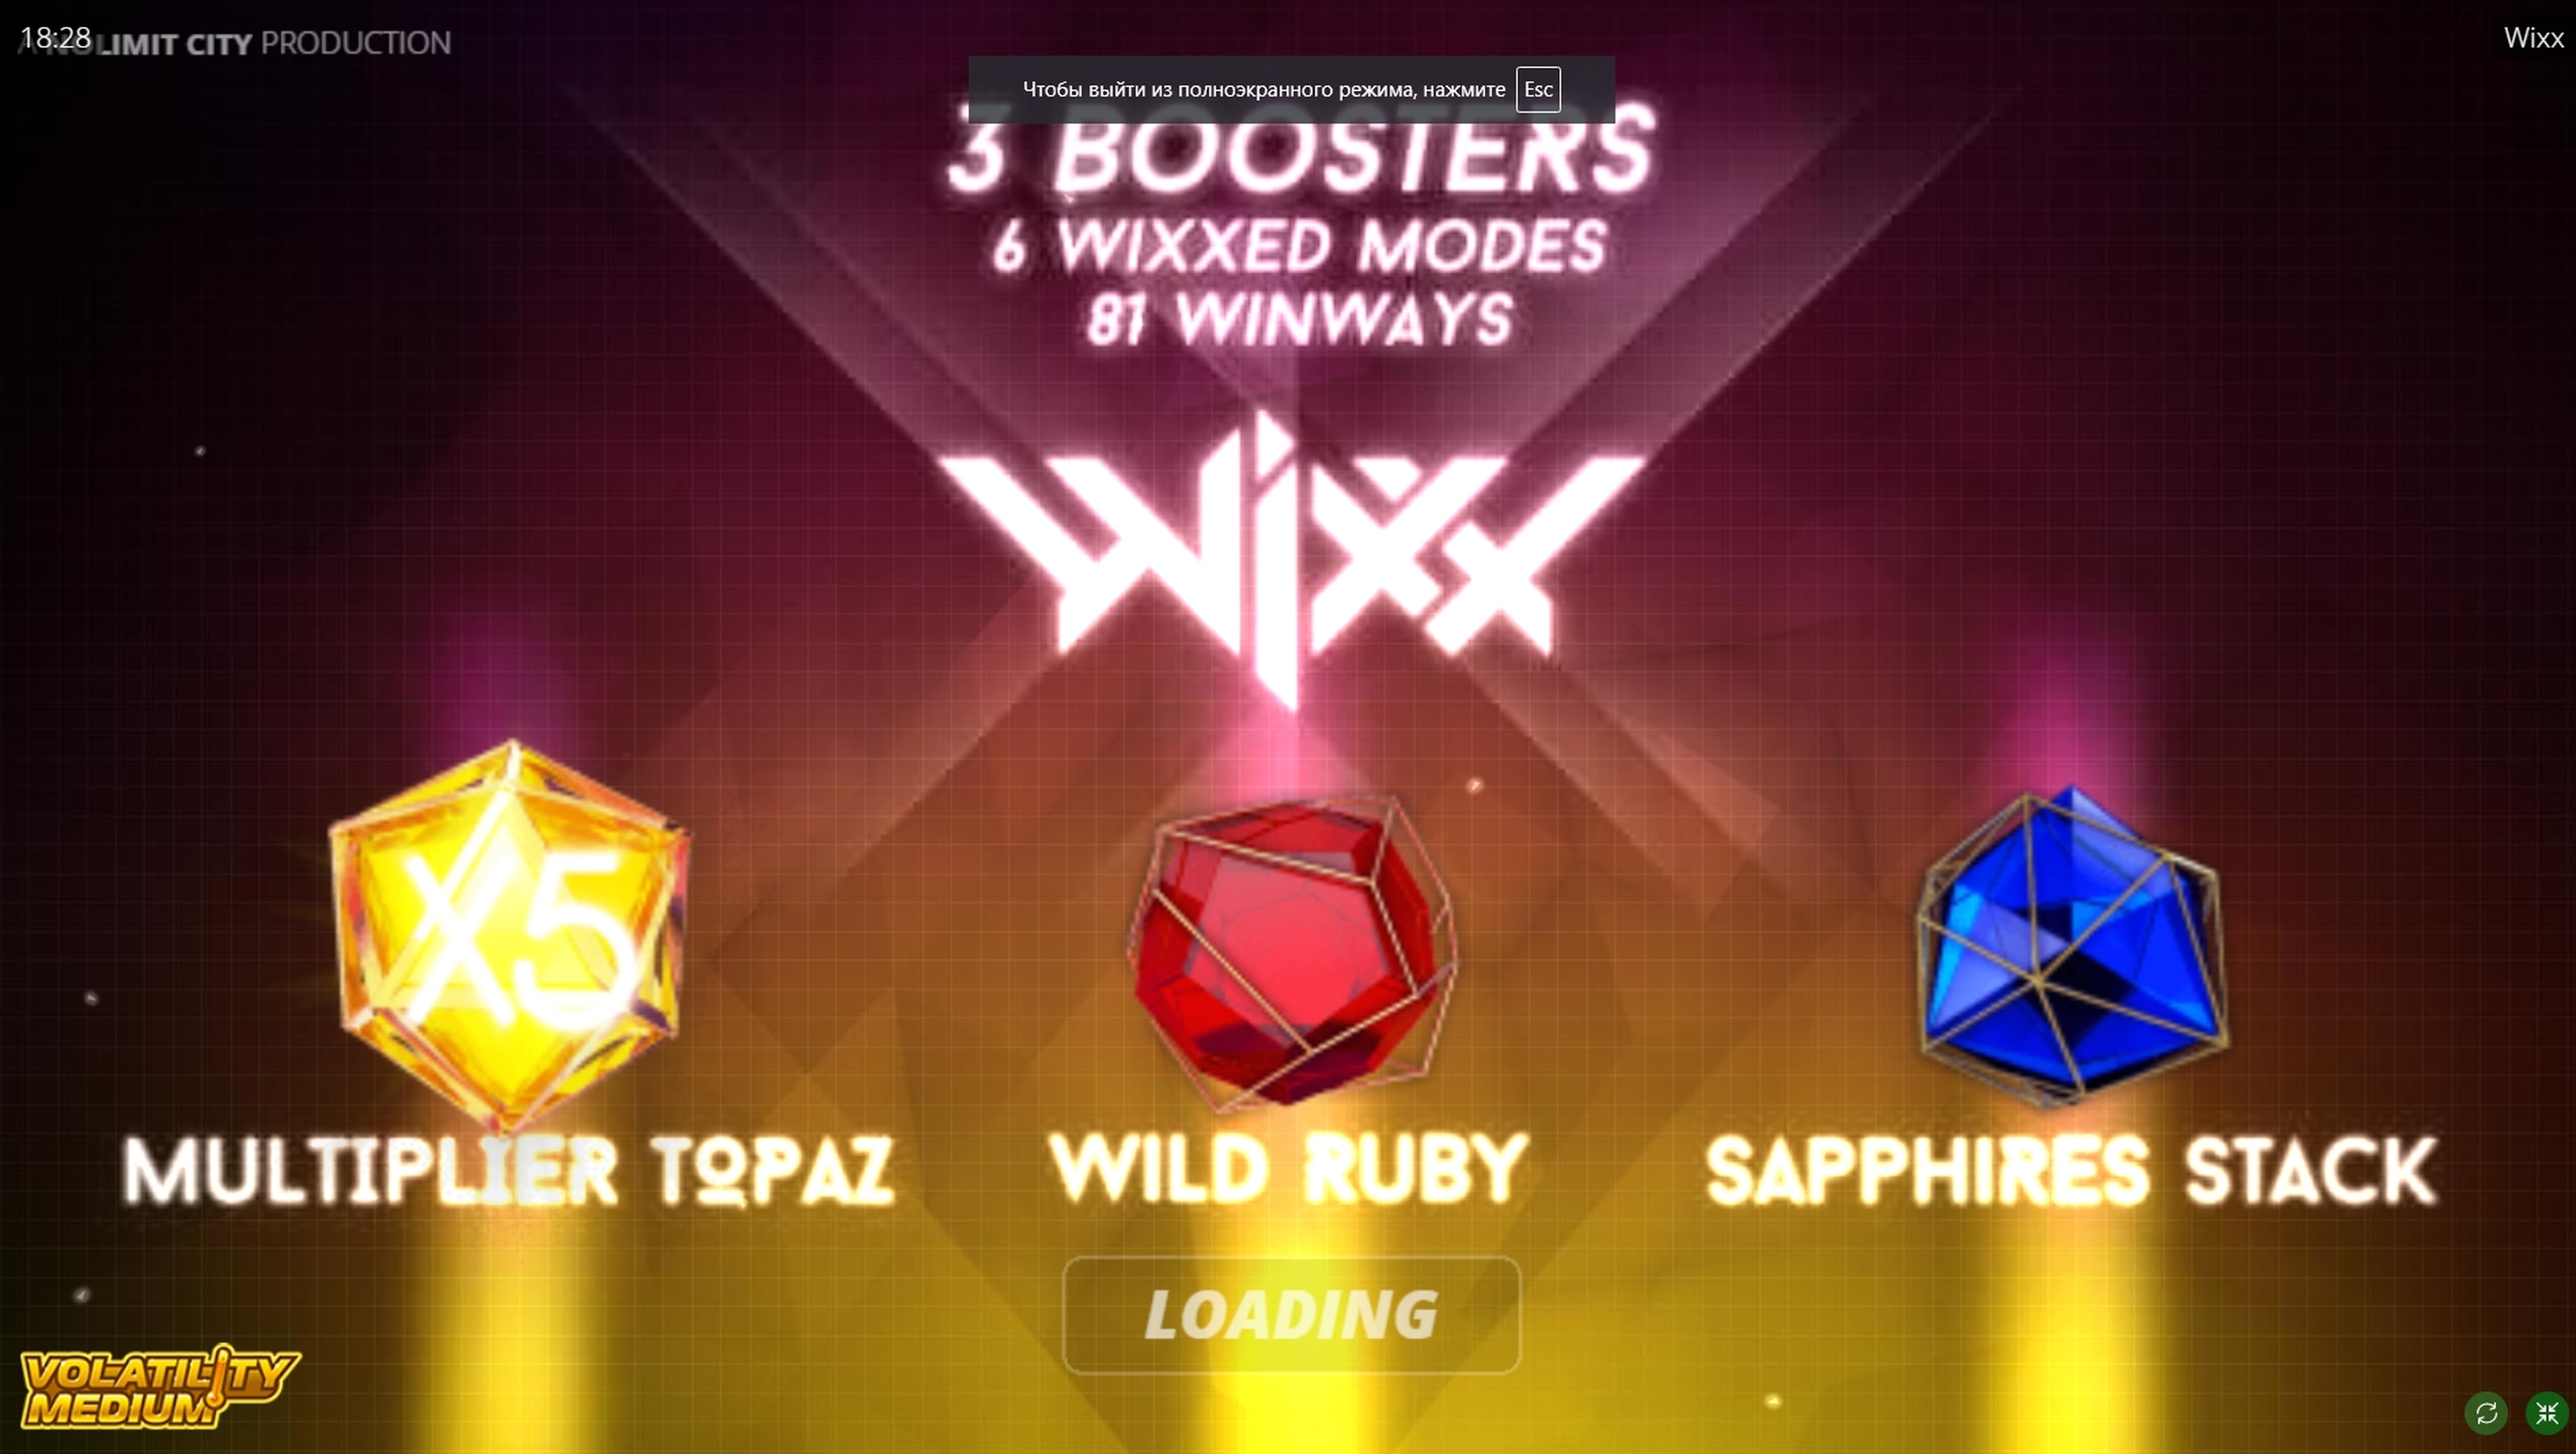 Play Wixx Free Casino Slot Game by Nolimit City